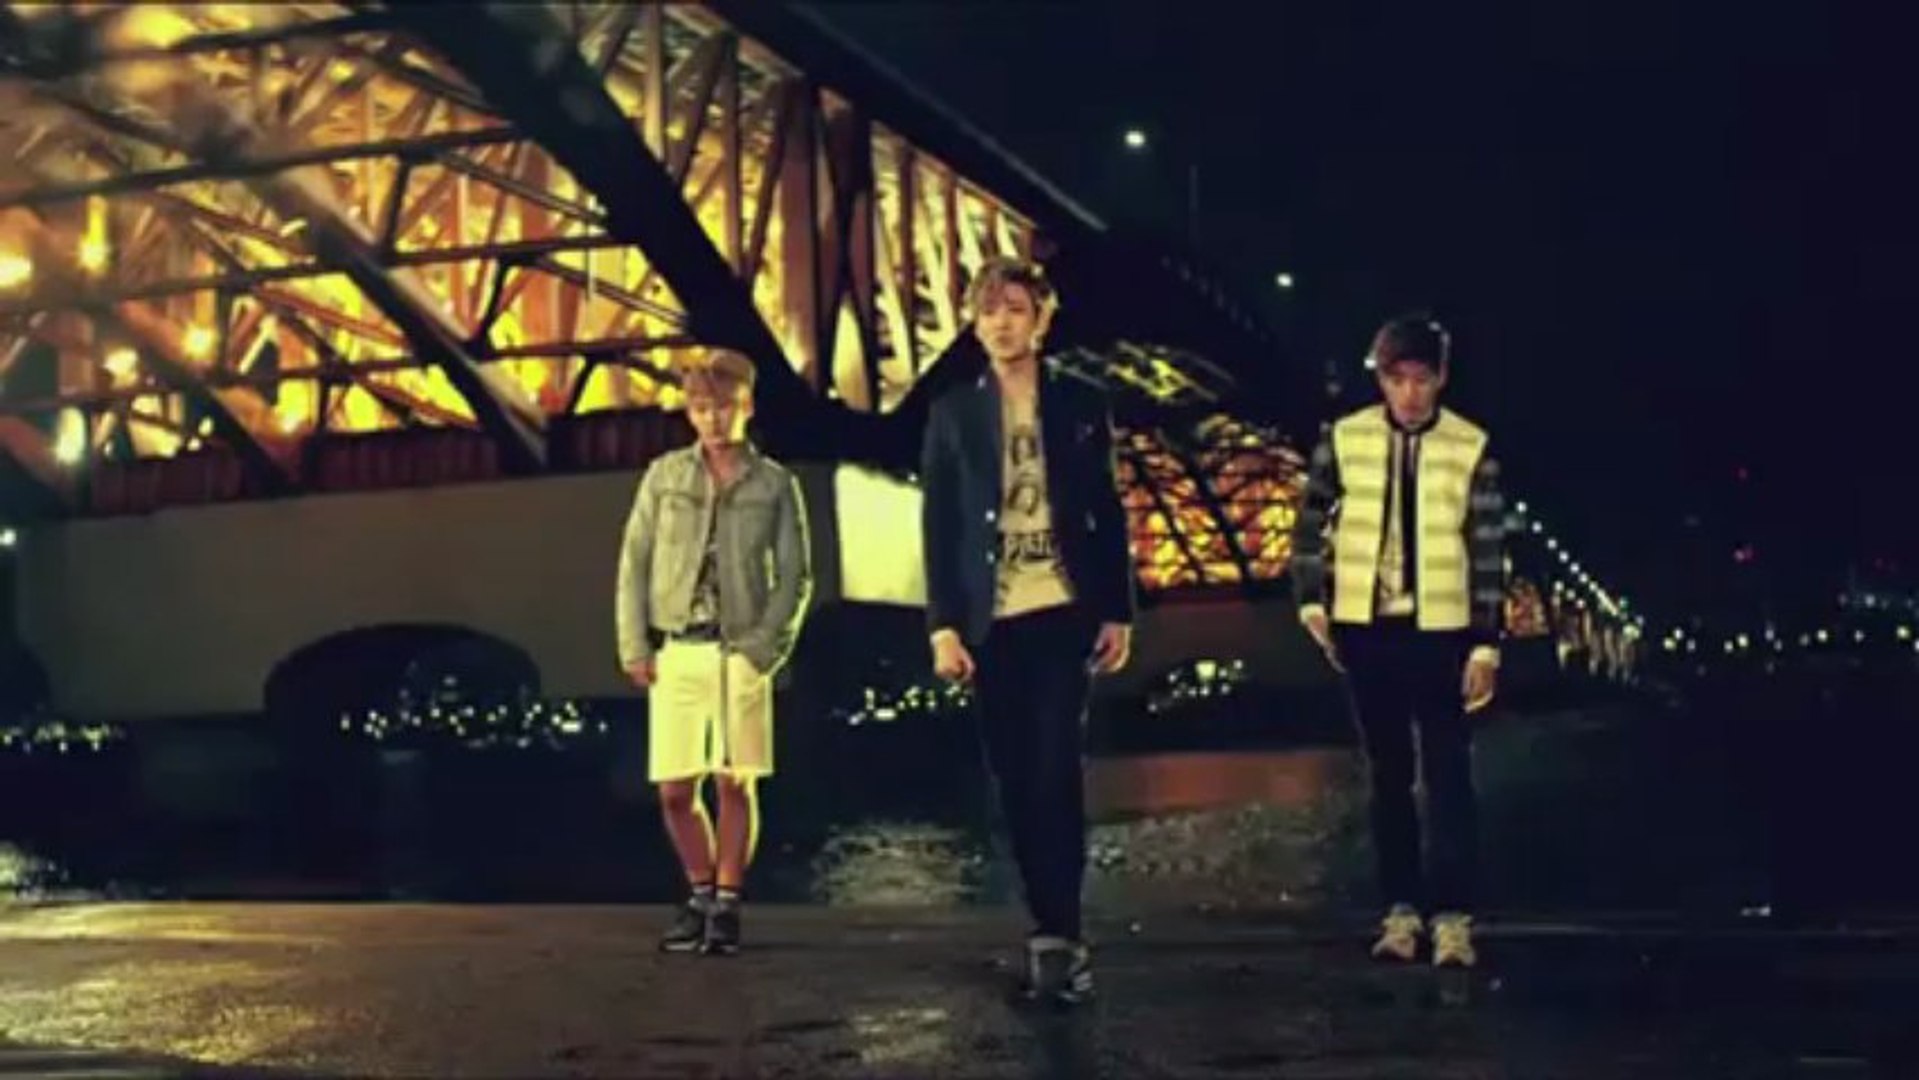 uBeat - Should Have Treated You Better MV - Video Dailymotion